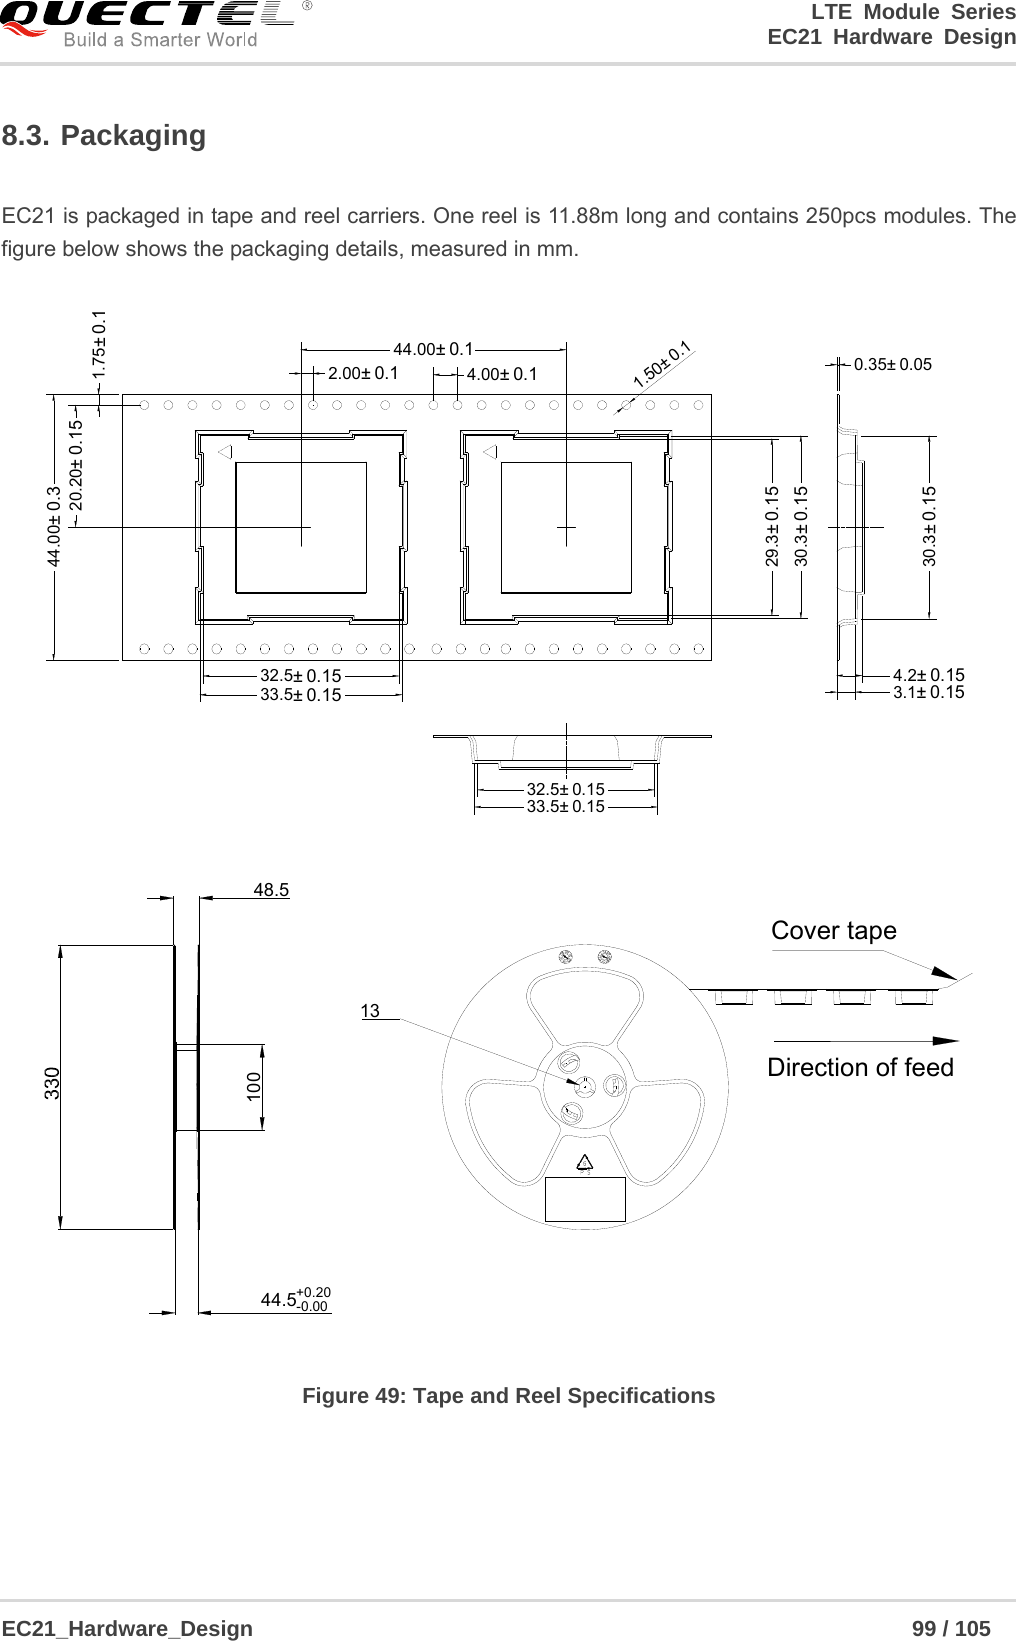                                                                        LTE Module Series                                                                 EC21 Hardware Design  EC21_Hardware_Design                                                            99 / 105    8.3. Packaging  EC21 is packaged in tape and reel carriers. One reel is 11.88m long and contains 250pcs modules. The figure below shows the packaging details, measured in mm. 30.3± 0.1529.3± 0.1530.3± 0.1532.5± 0.1533.5± 0.150.35± 0.054.2± 0.153.1± 0.1532.5± 0.1533.5± 0.154.00± 0.12.00±0.11.75± 0.120.20± 0.1544.00± 0.344.00±0.11.50±0.1 1310044.5+0.20-0.0048.5 Figure 49: Tape and Reel Specifications  